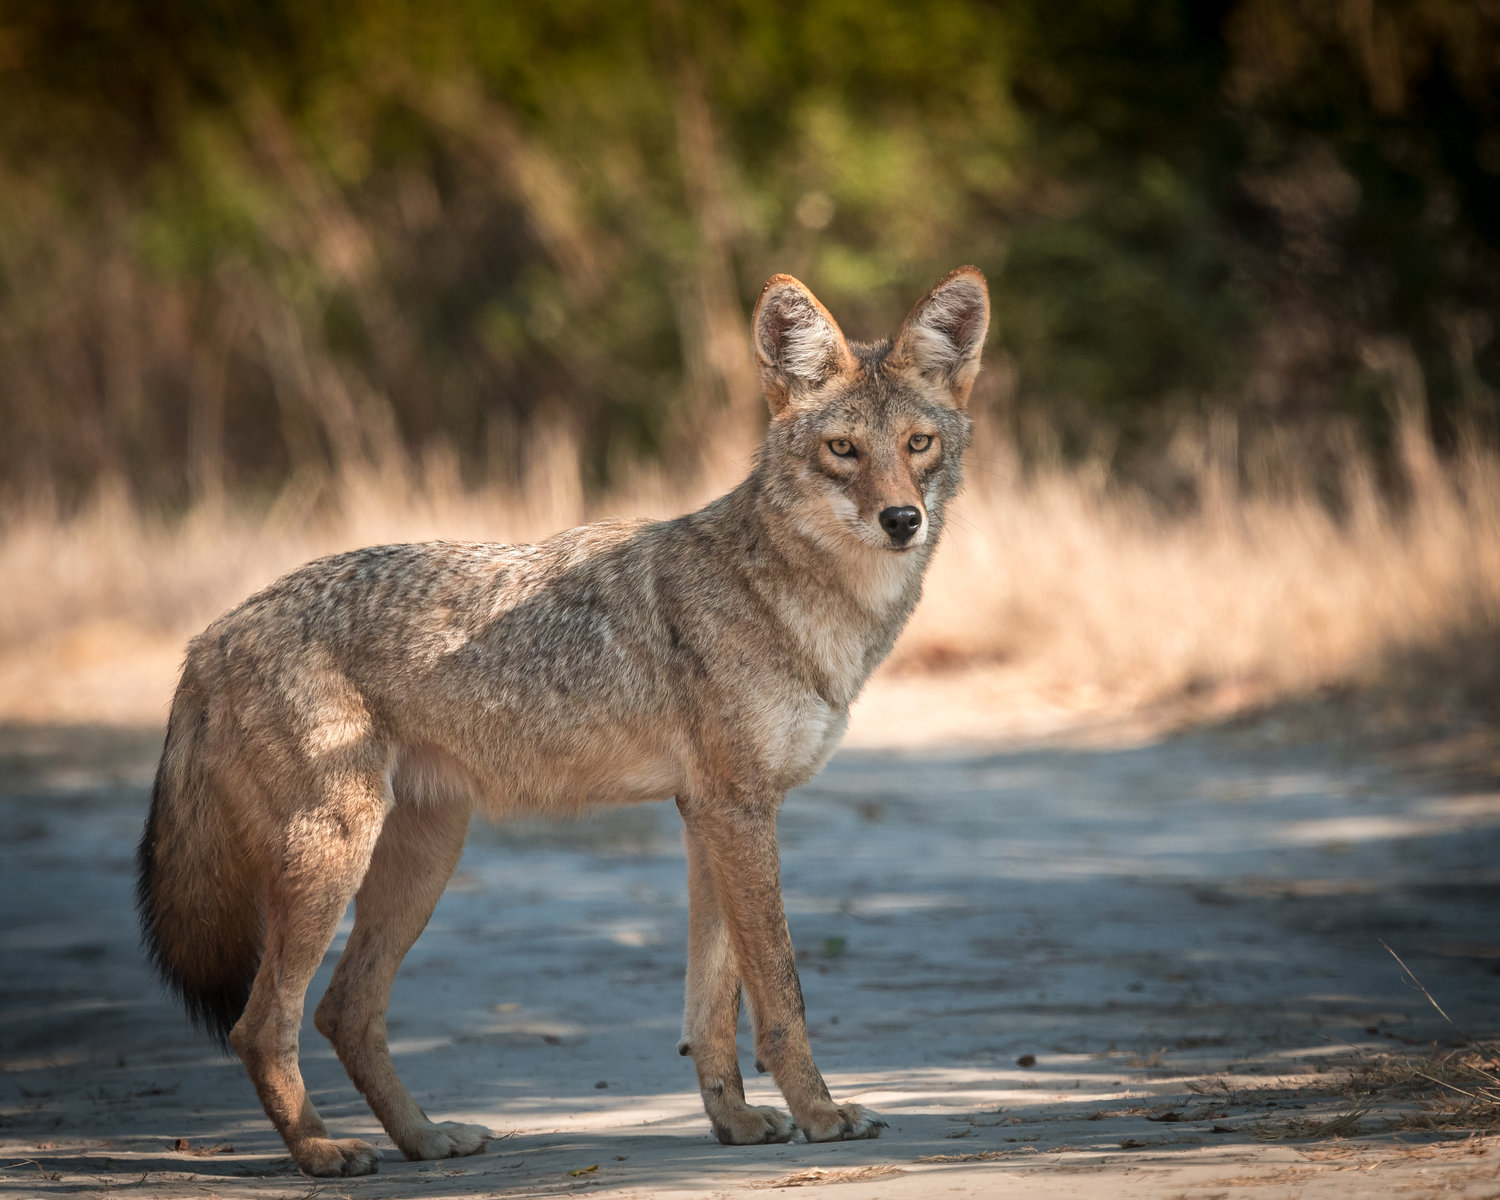 Coyote numbers on Long Island have been increasing.